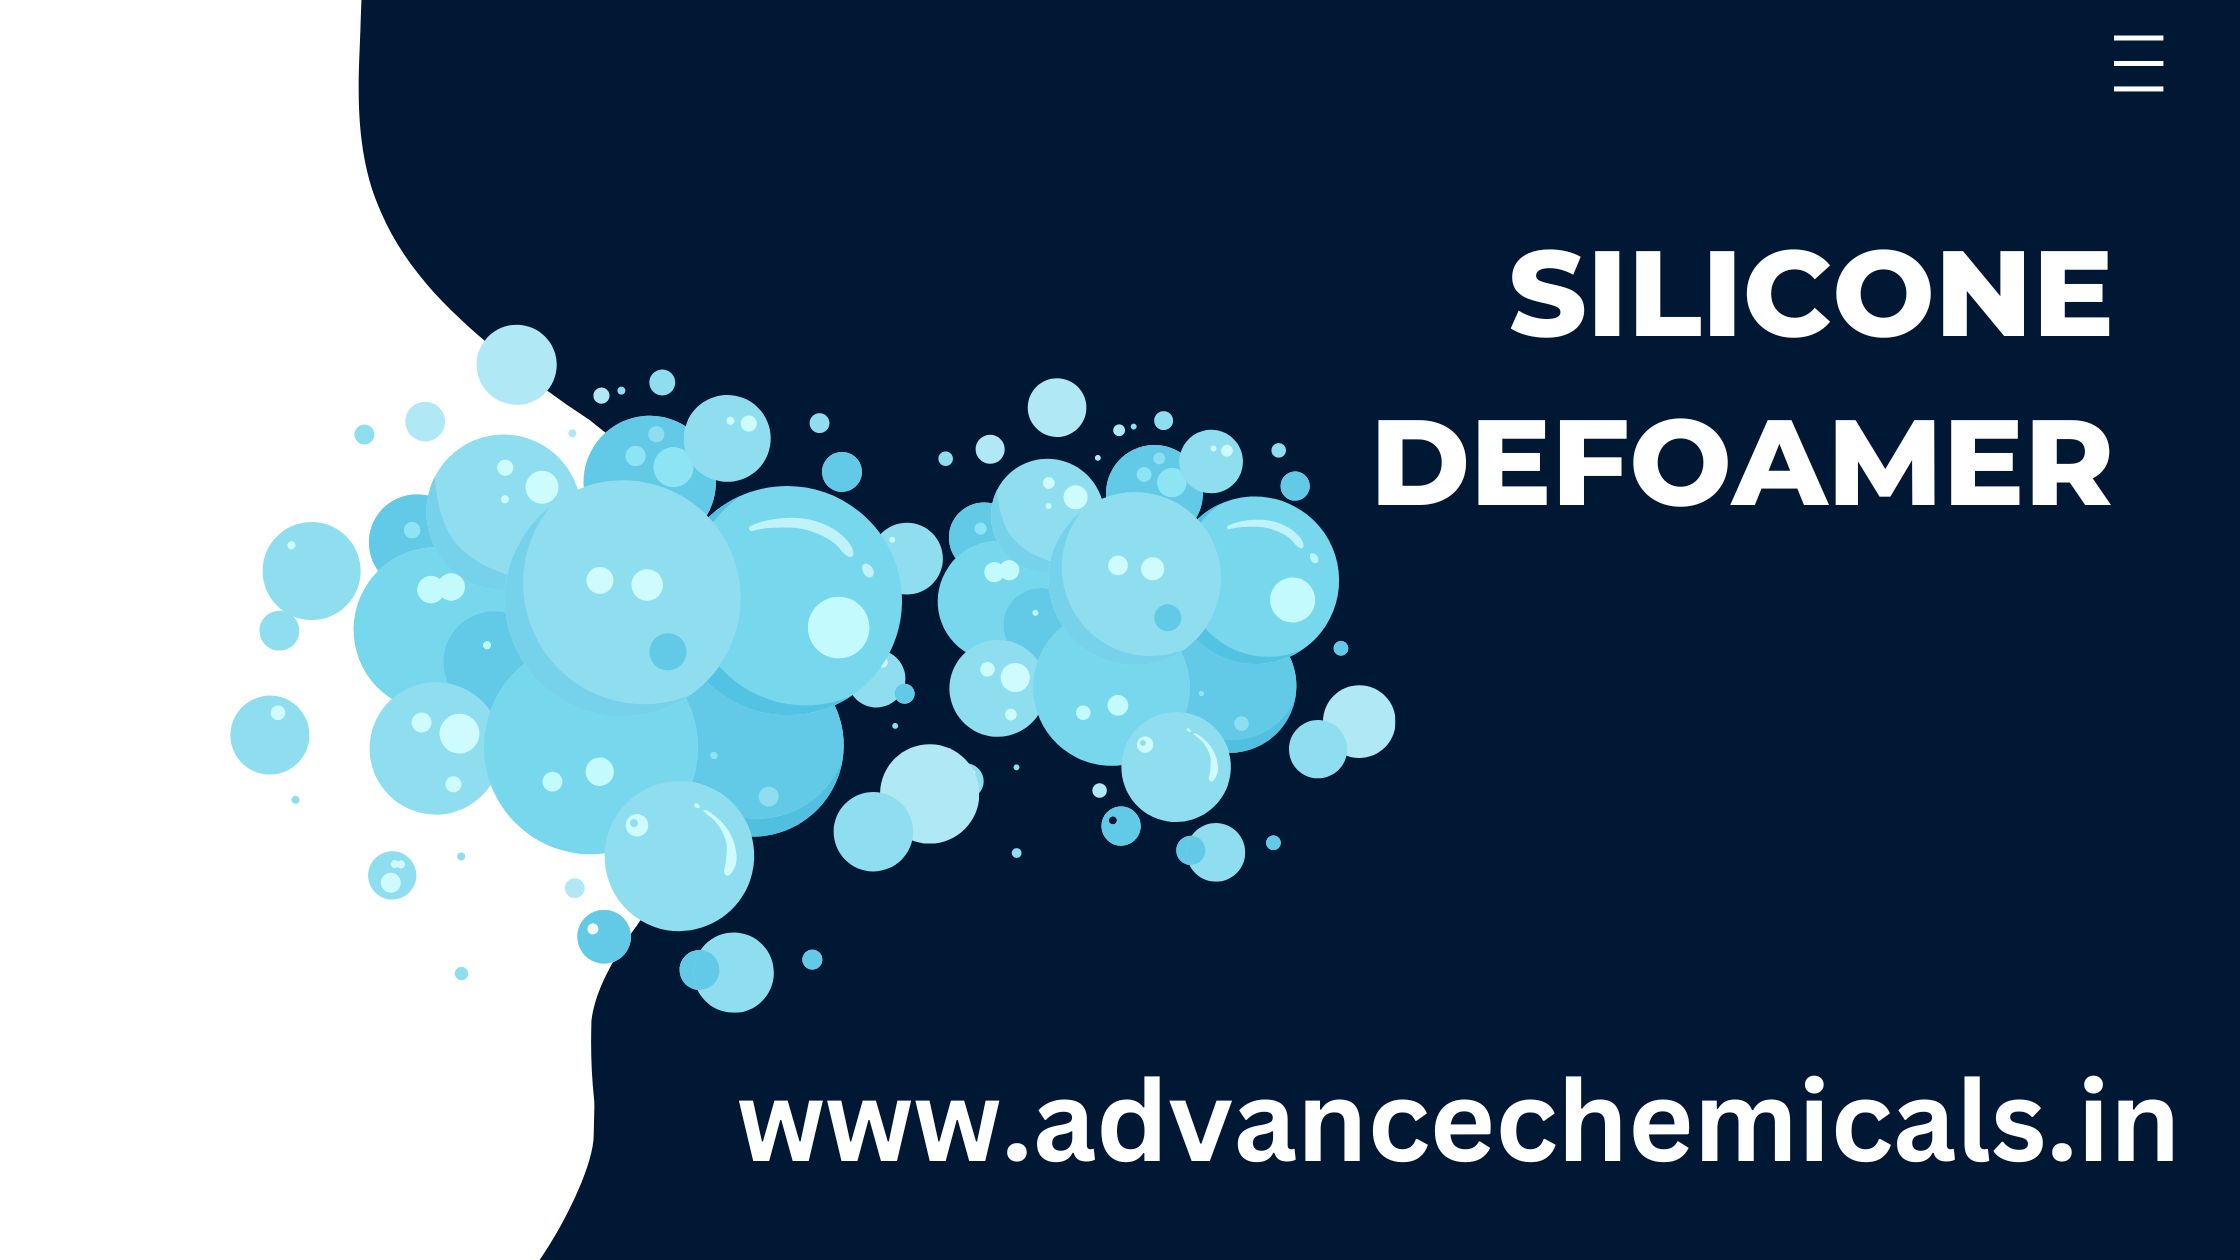 Advantages and Disadvantages of Silicone Defoamers